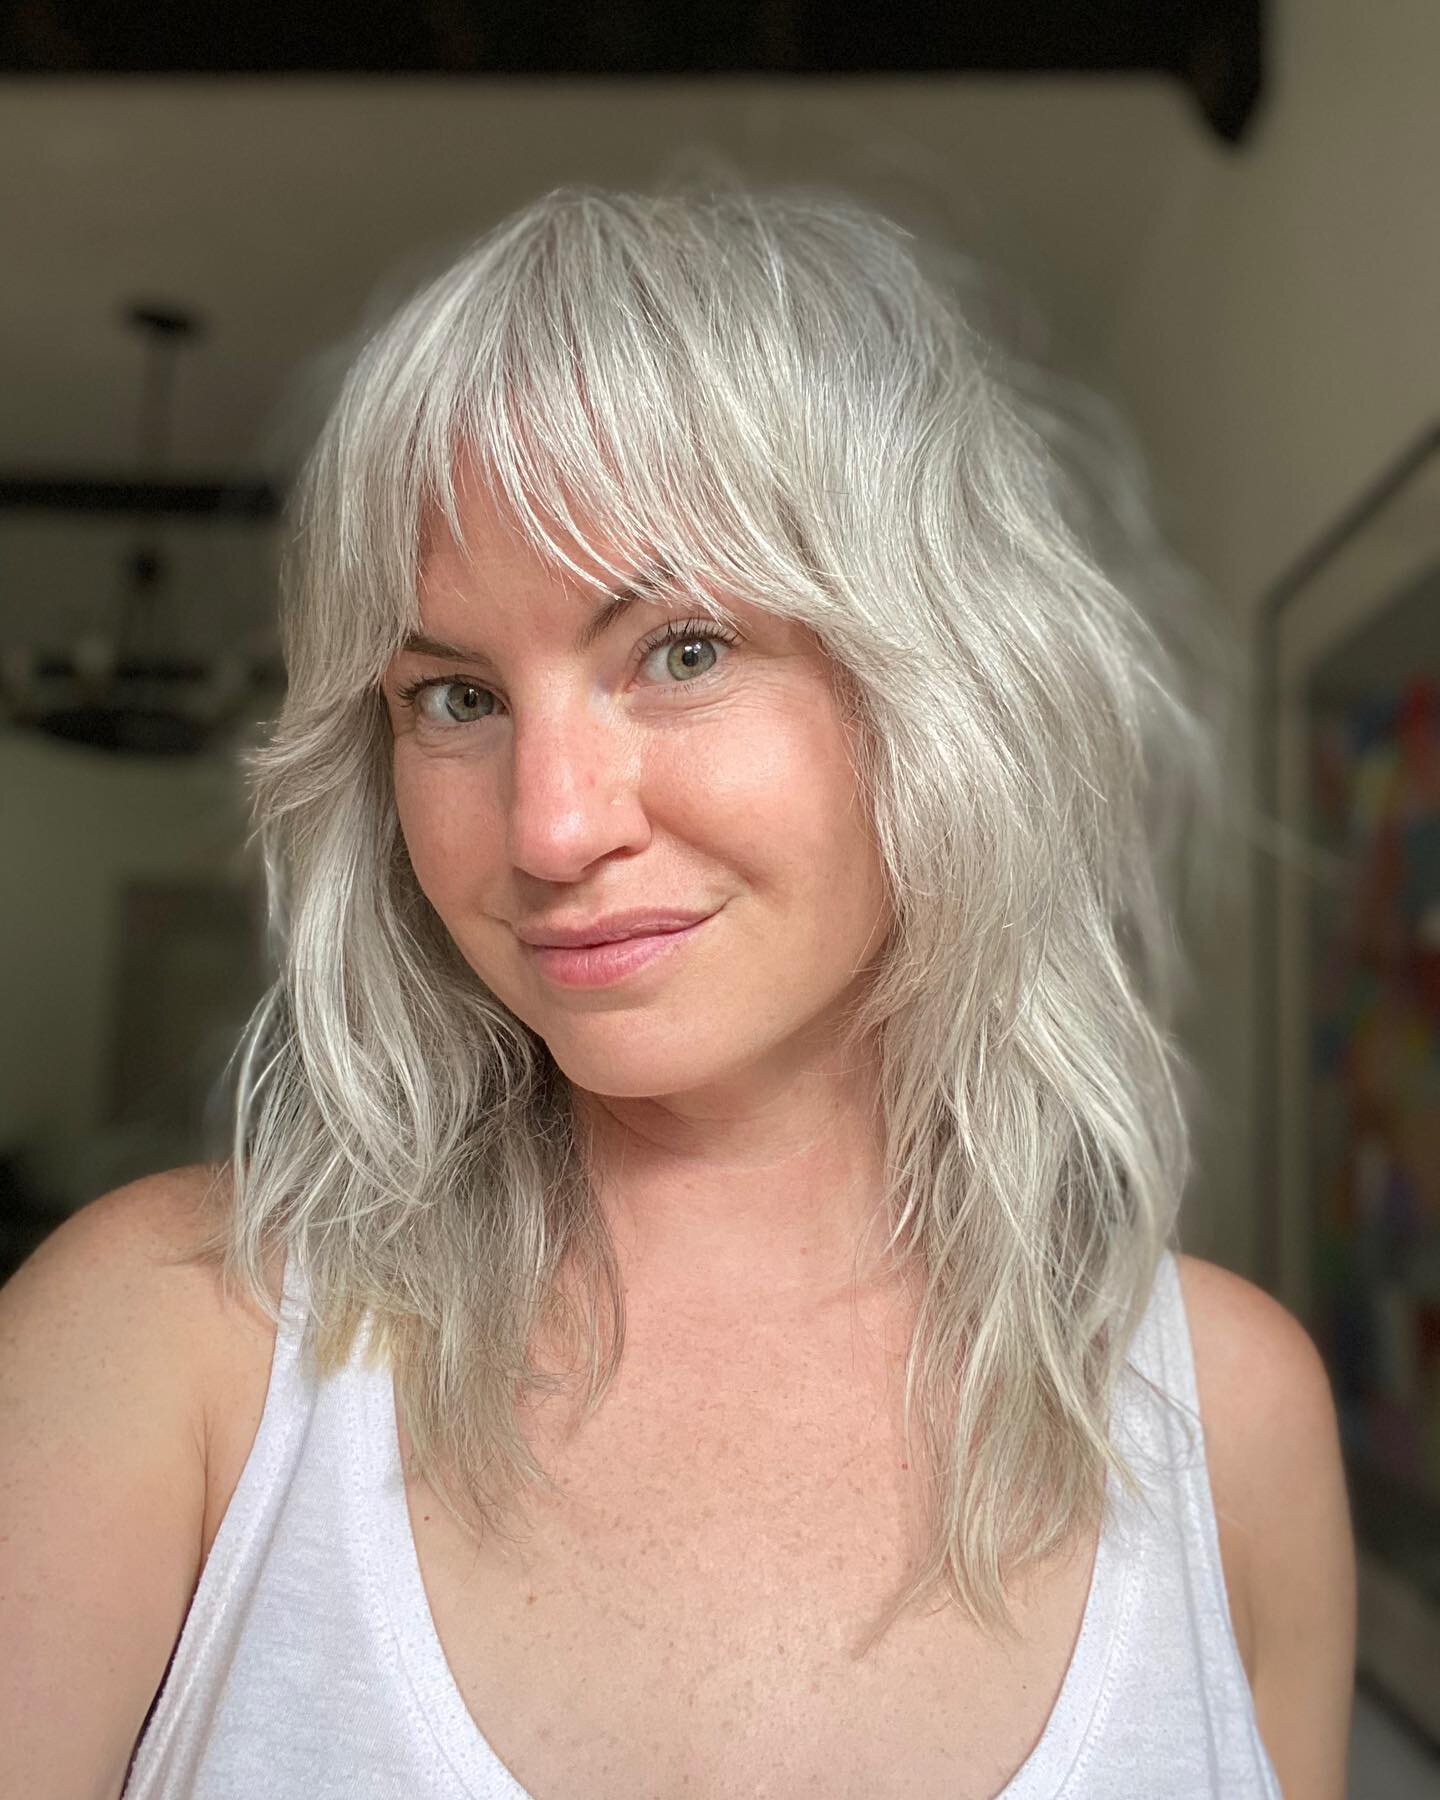 I L💘VE when clients send selfies, makes my heart flutter! 🤩 please send your cutie hair pics my way if the mood hits and you&rsquo;re feeling yourself ✨✨✨ 

#shag #softshag #curtainbangs #razorcut #tacomarazorcut #tacomasalon #tacomastylist